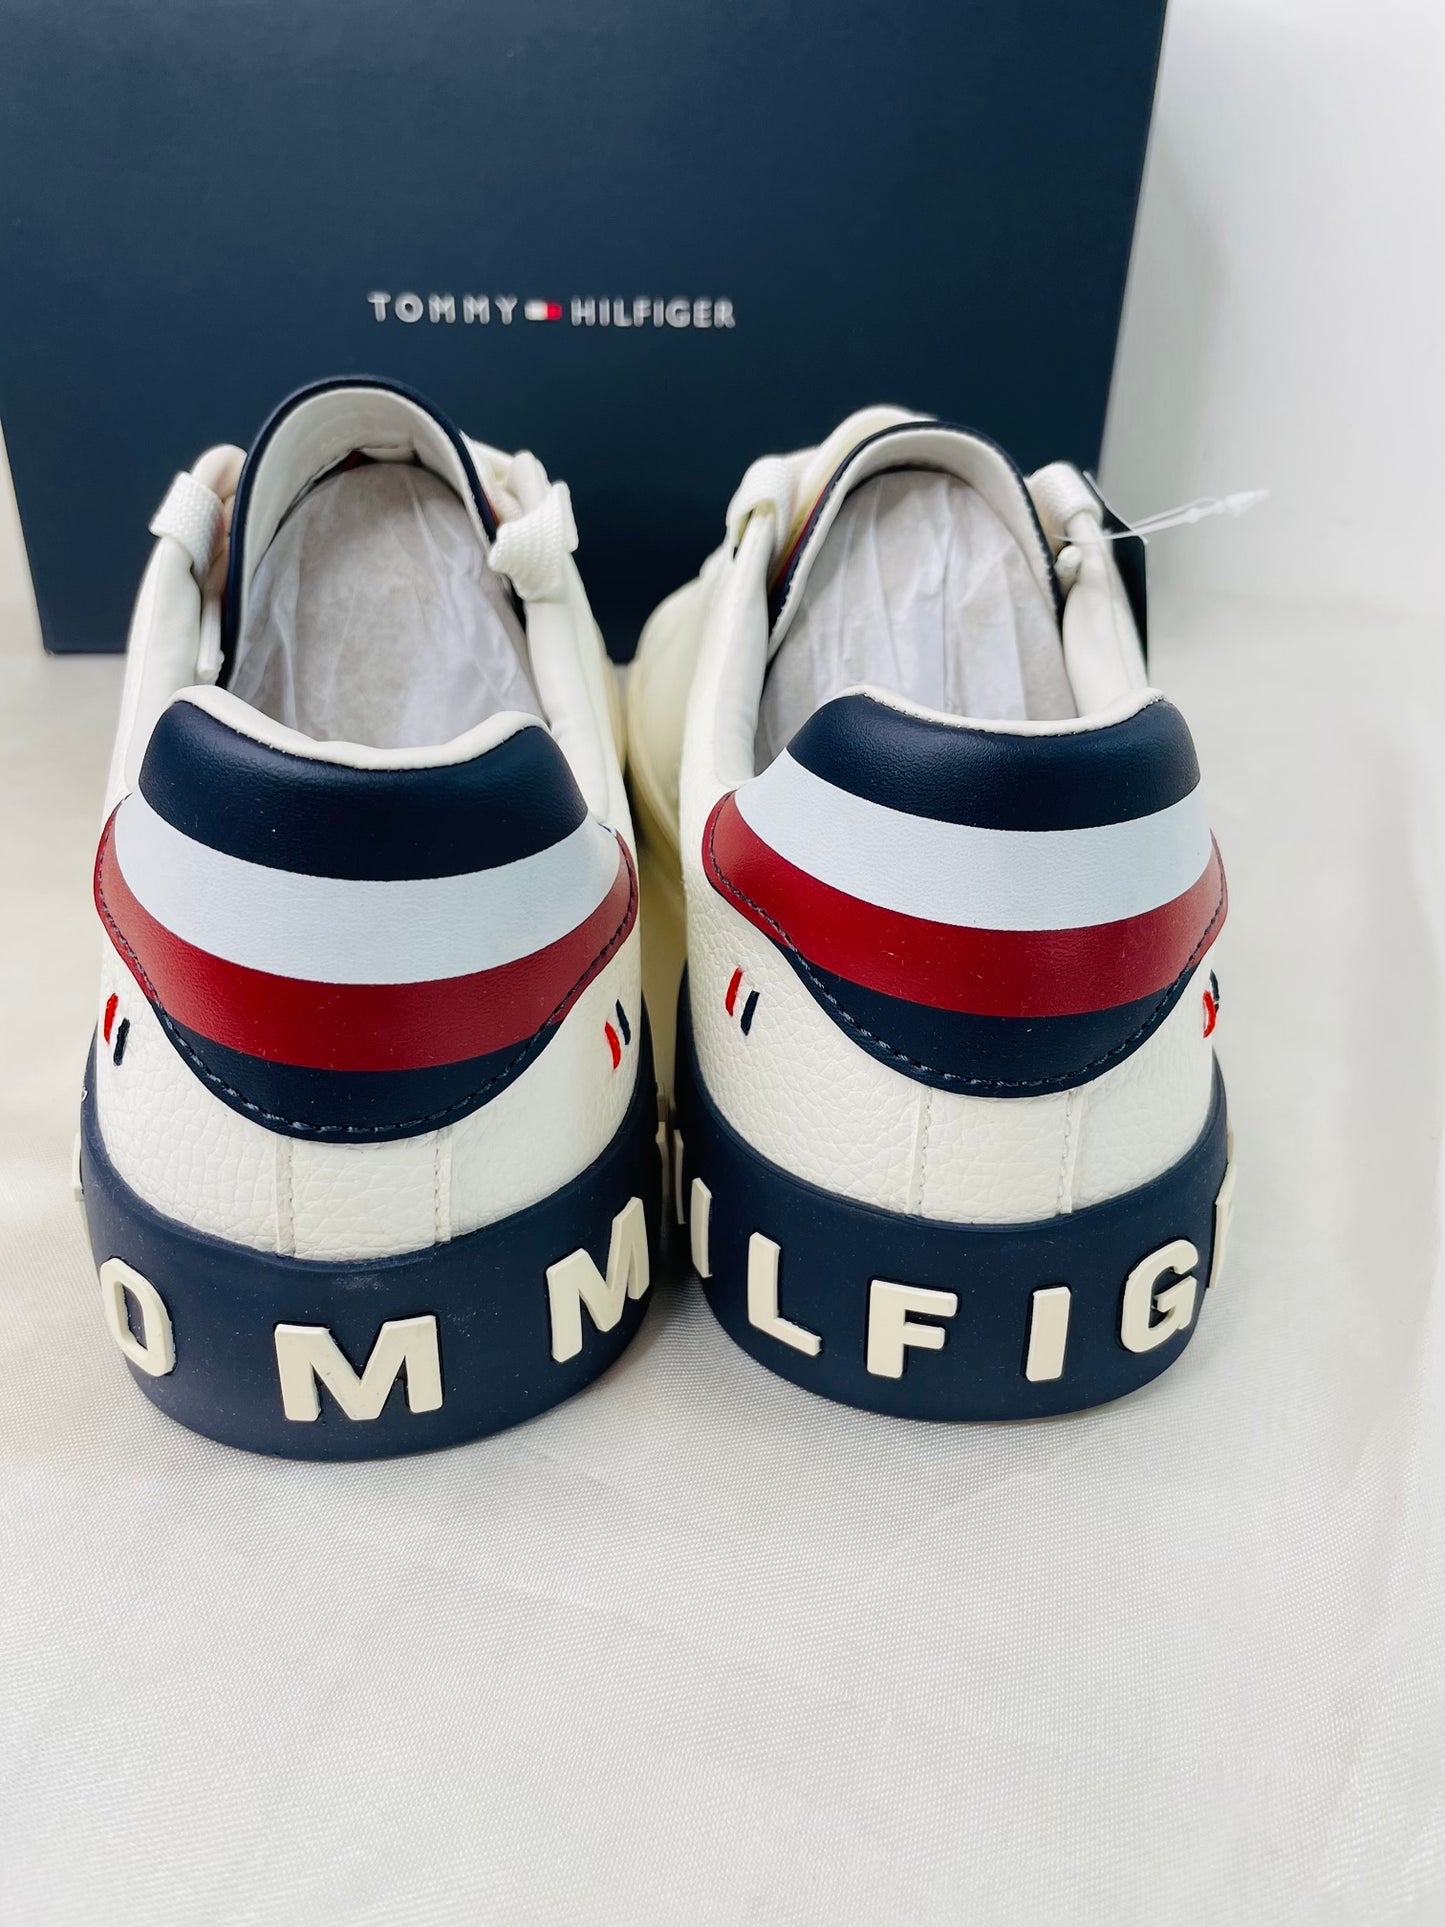 Tommy Hilfiger sneakers for men